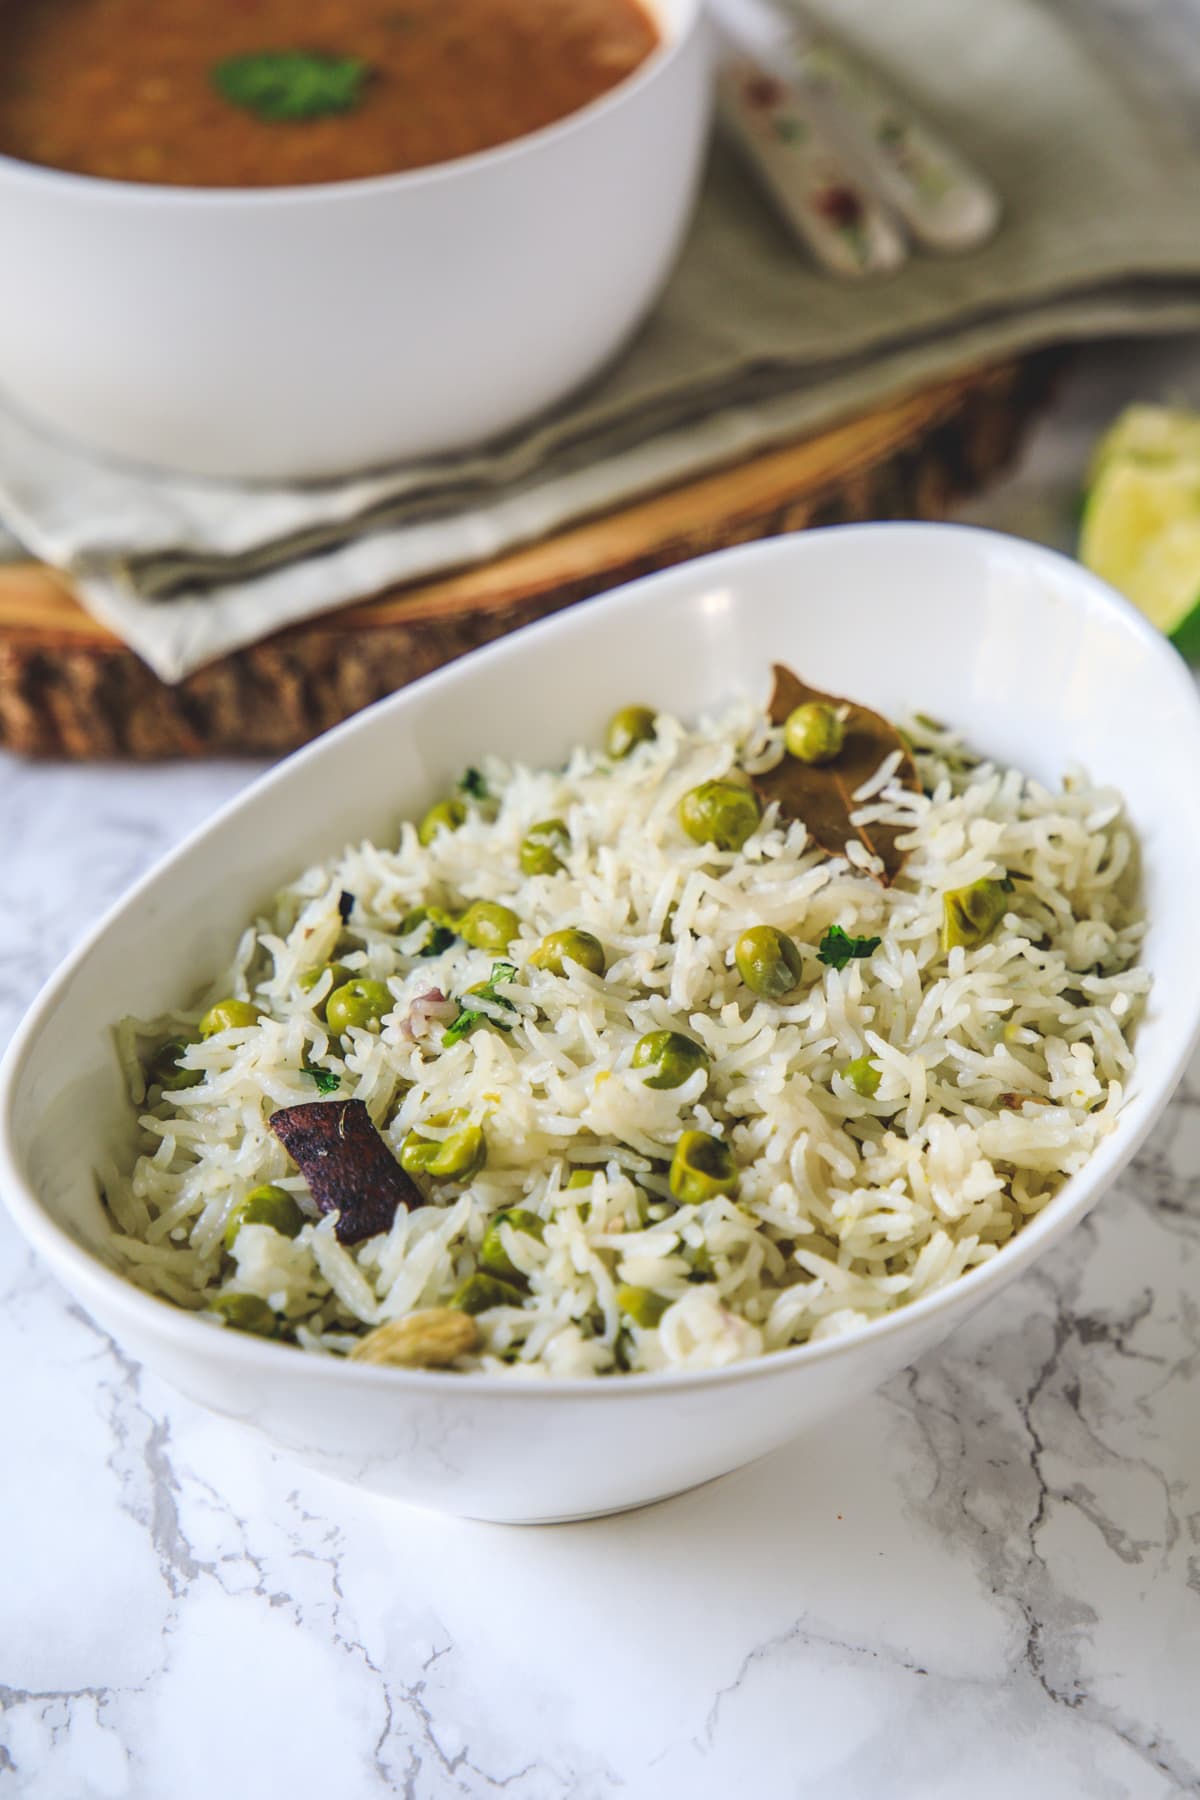 Peas pulao in a bowl with side of dal.